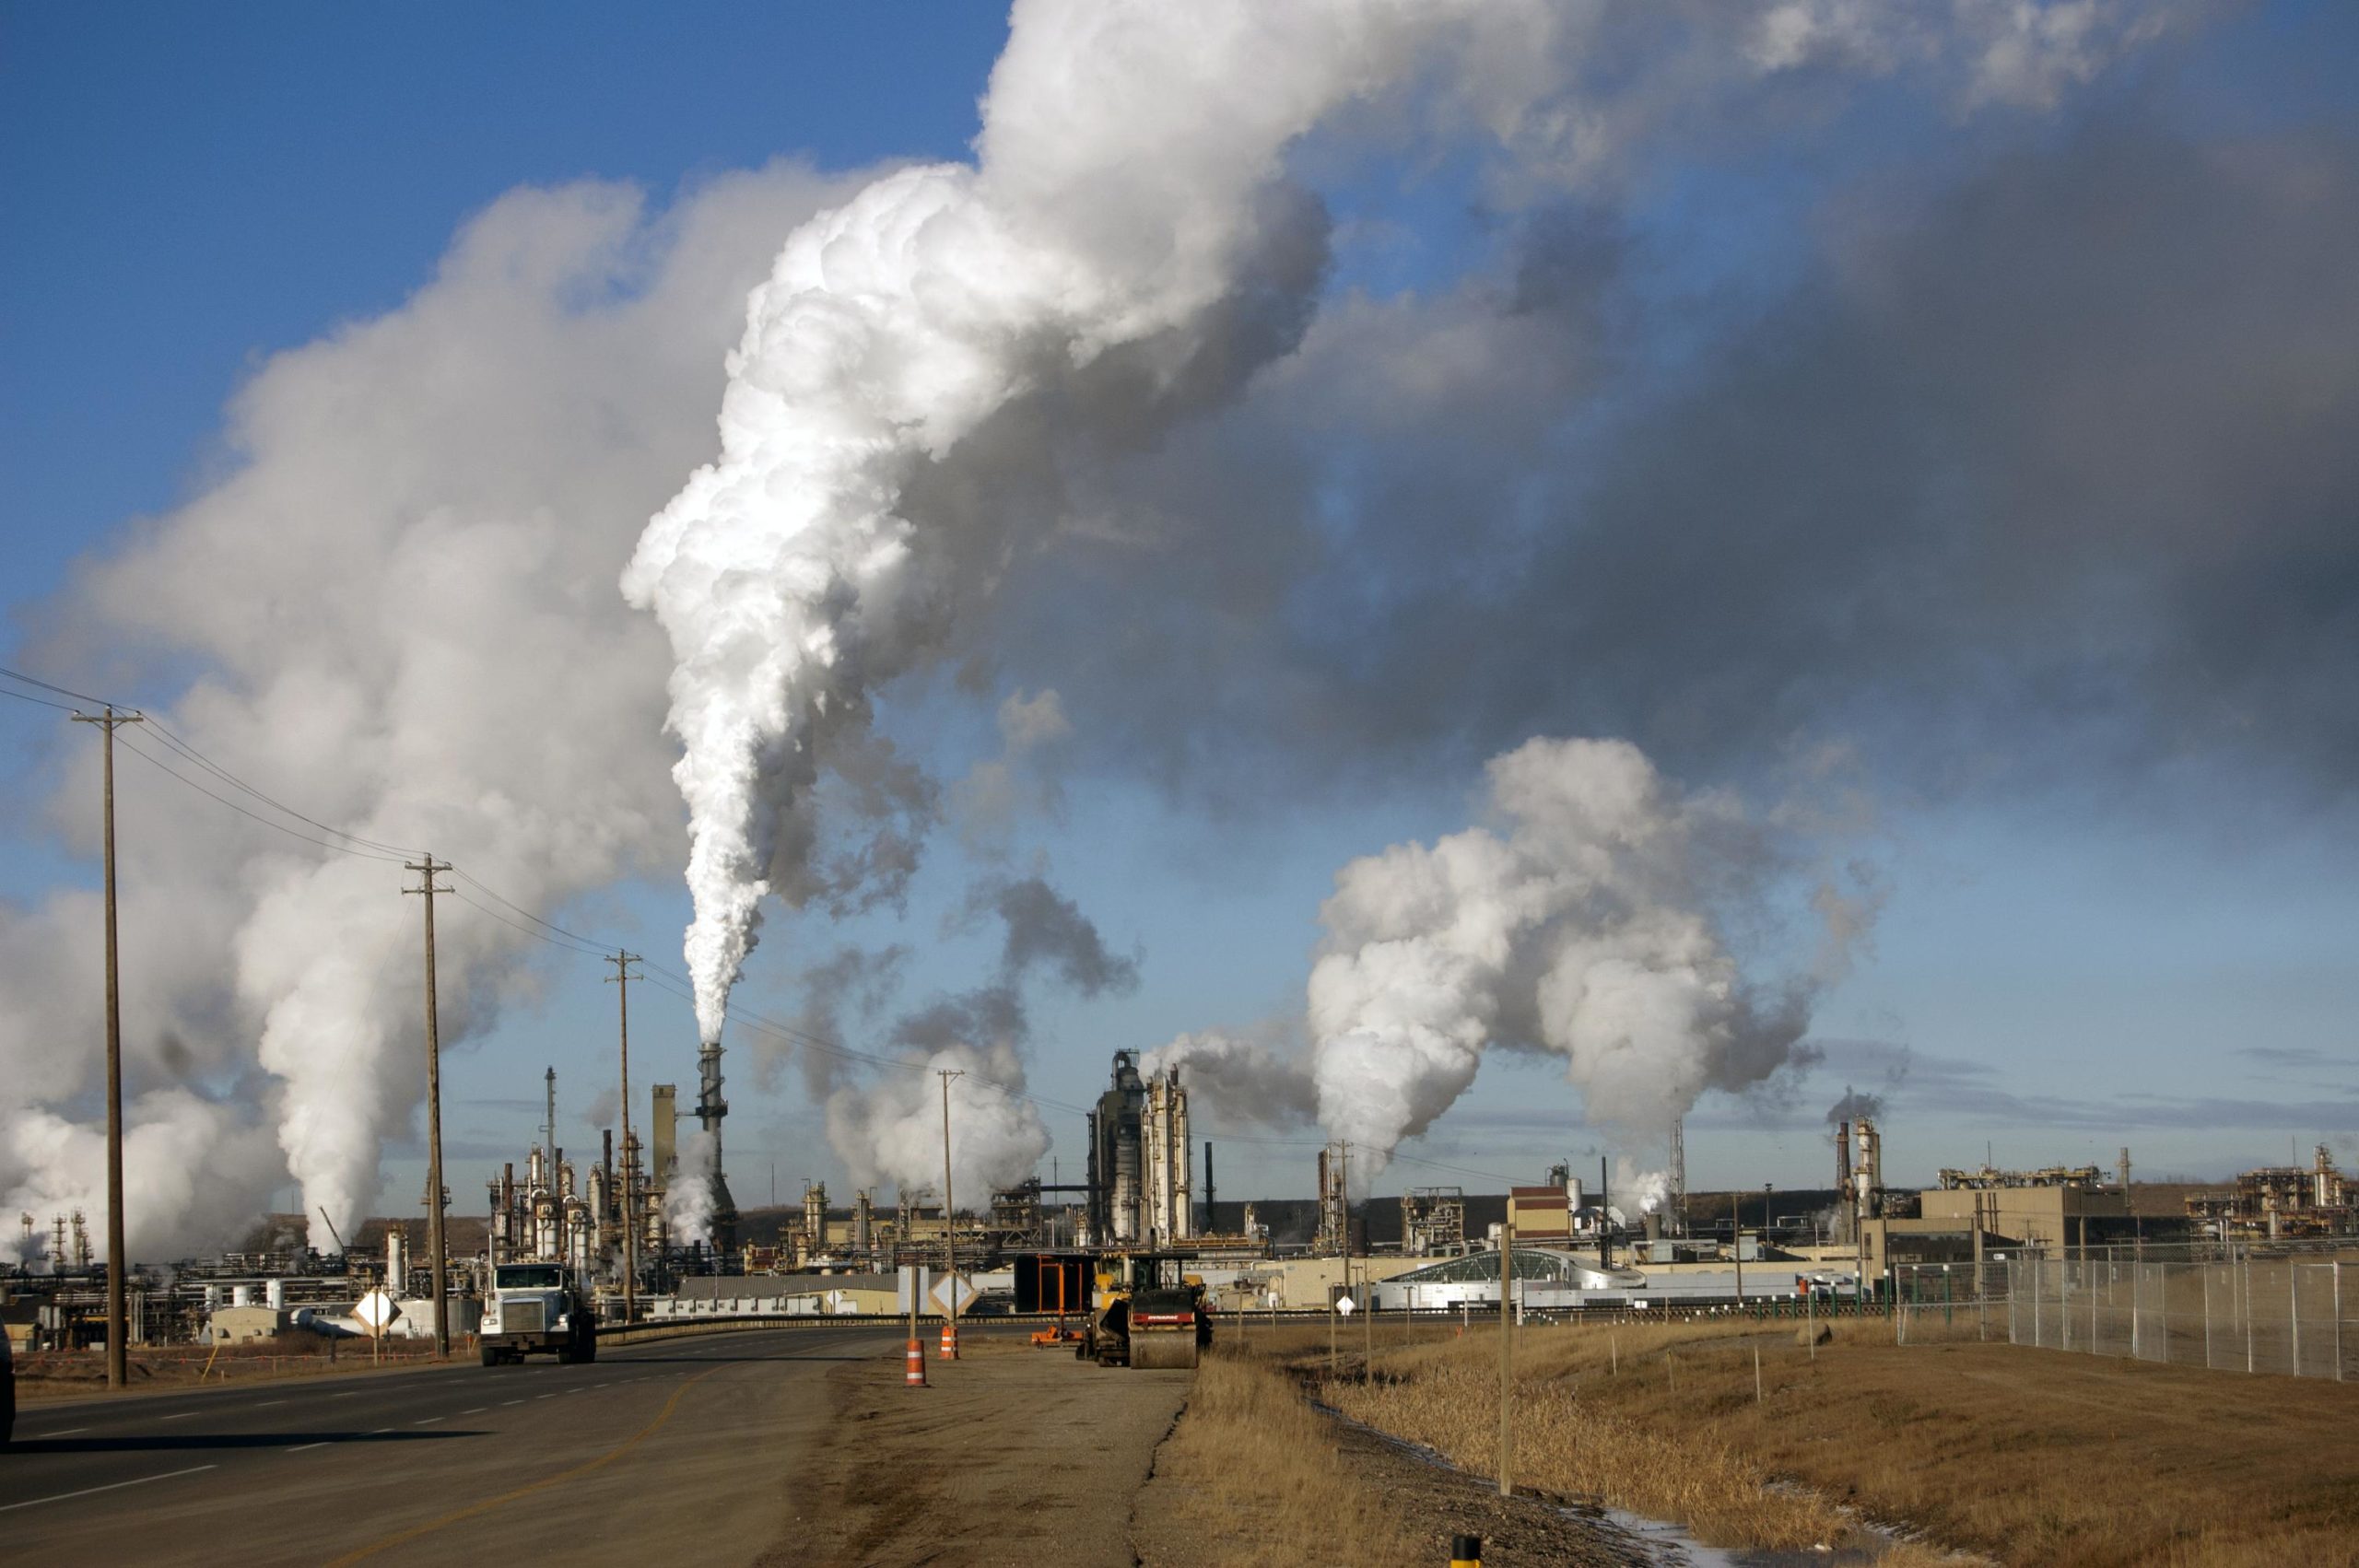 Profits of Doom: A Green Syndicalist Perspective on Tar Sands Worker Deaths